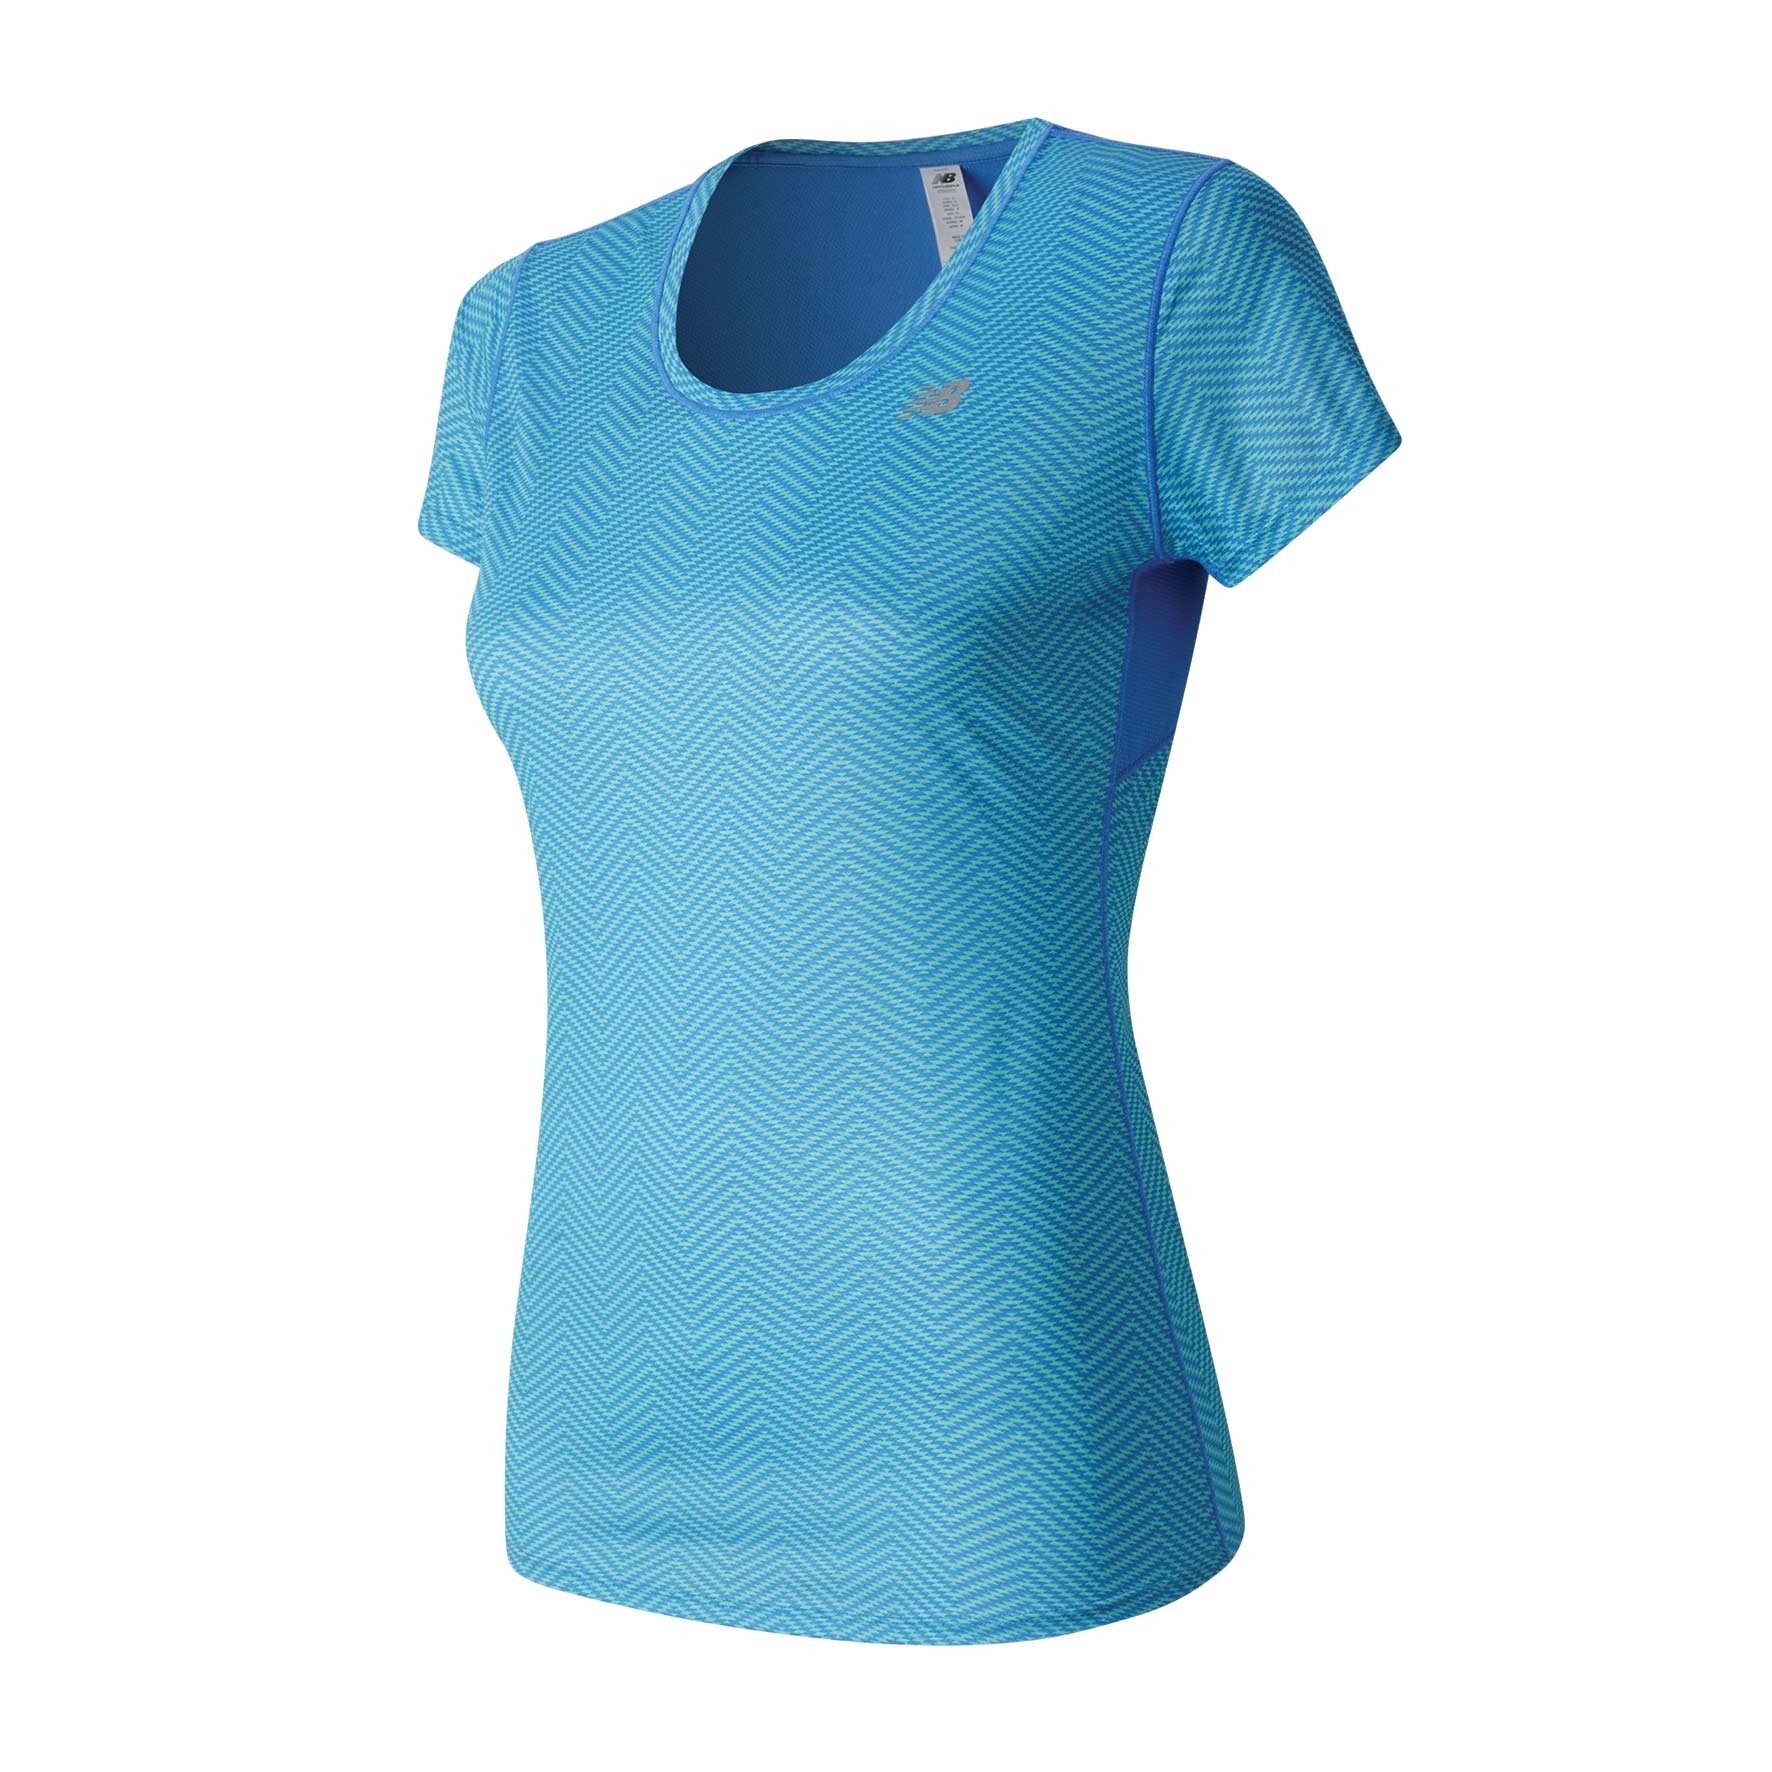 New Balance Womens Blue Accelerate Short Sleeve Graphic Tee